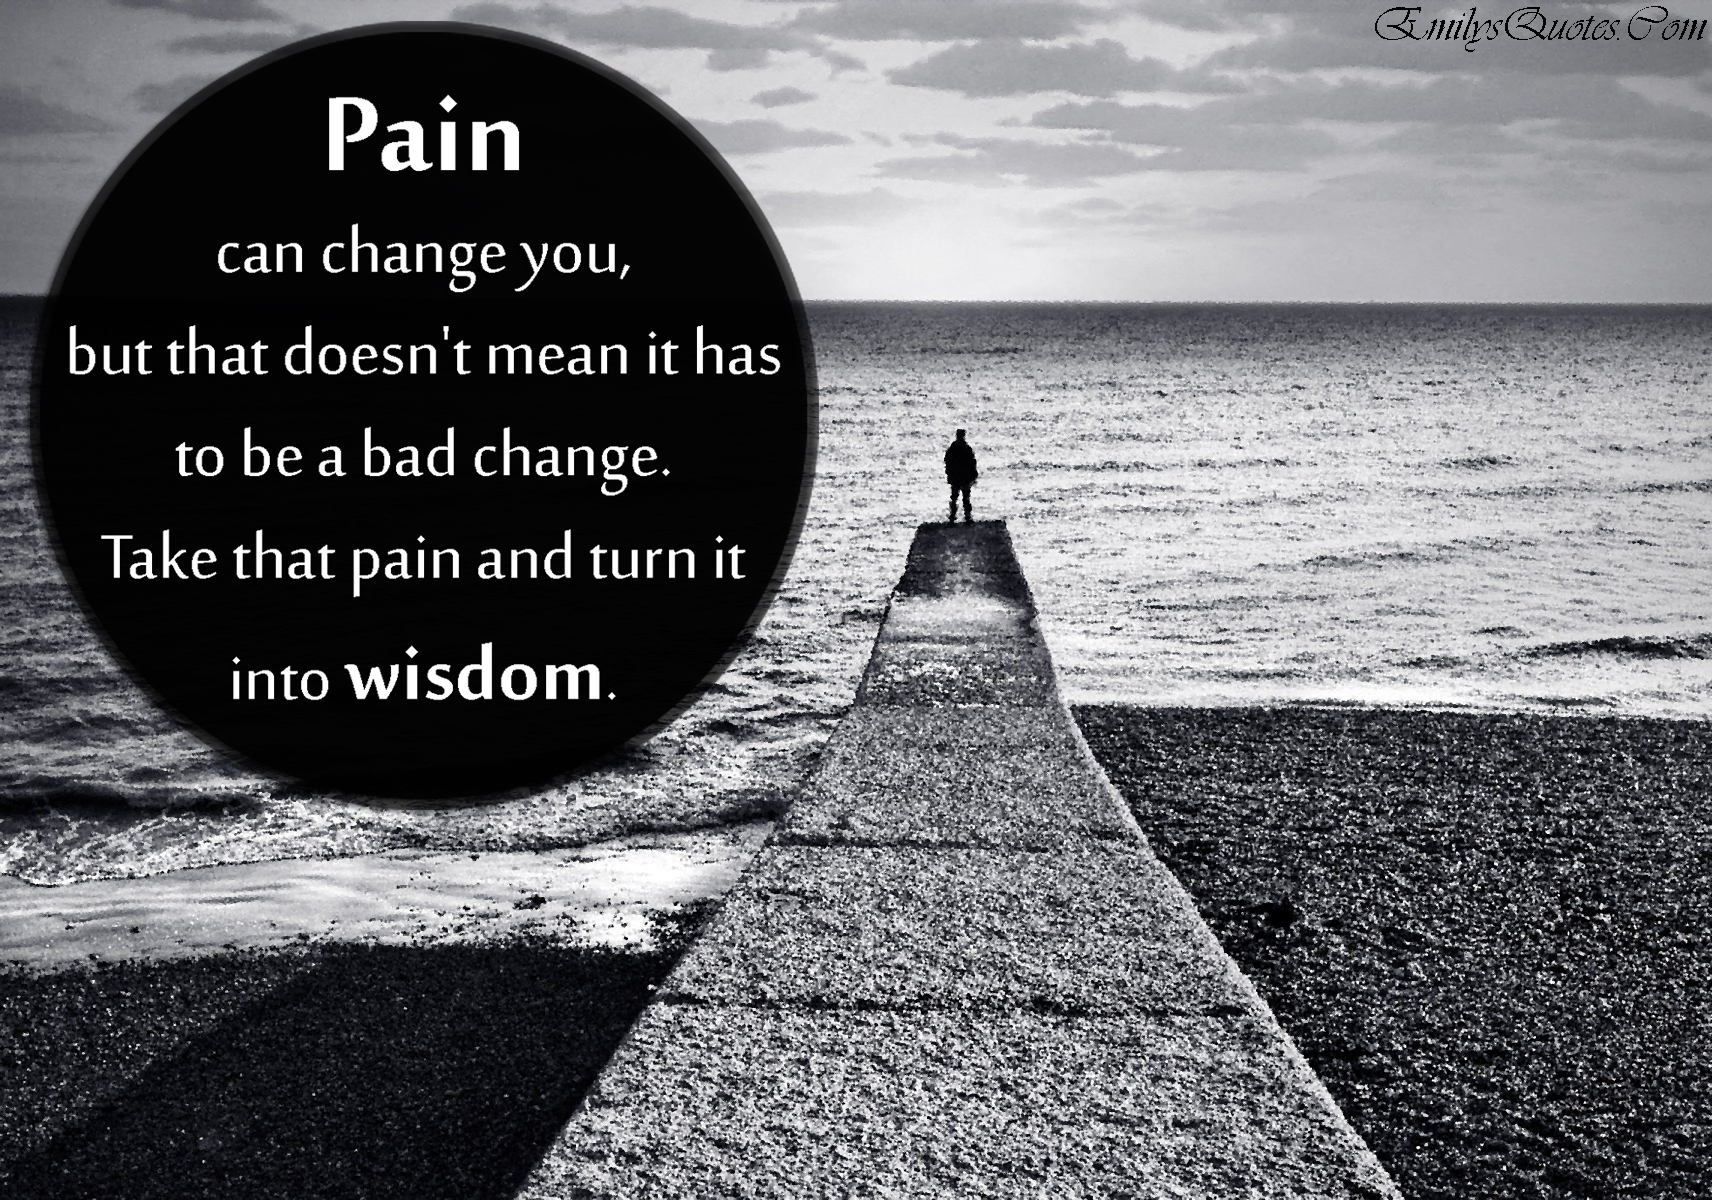 Pain can change you, but that doesn’t mean it has to be a bad change